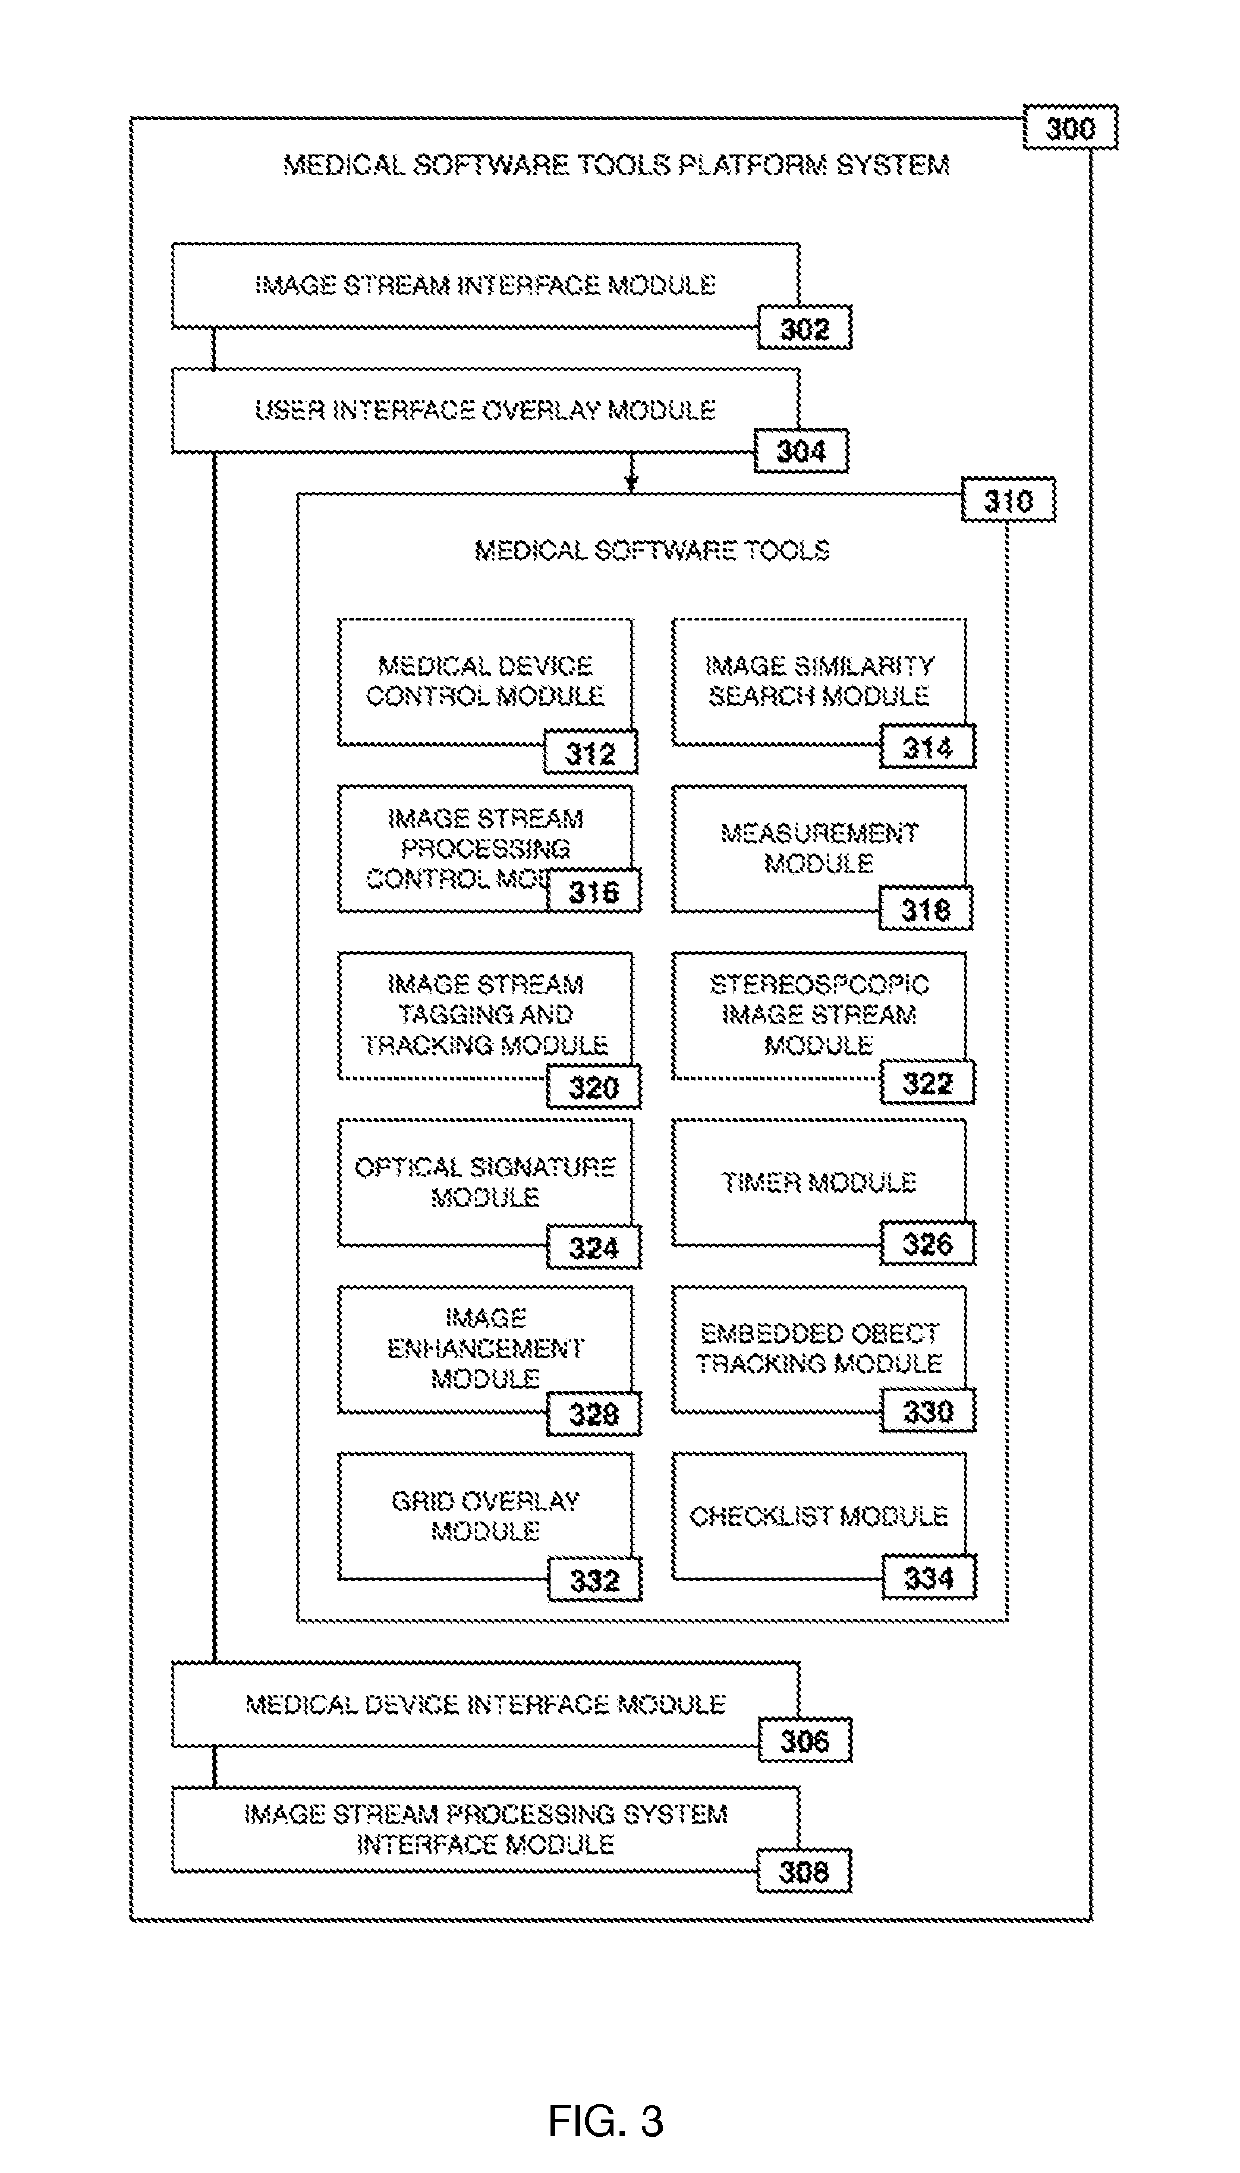 Method for enhanced data analysis with specialized video enabled software tools for medical environments